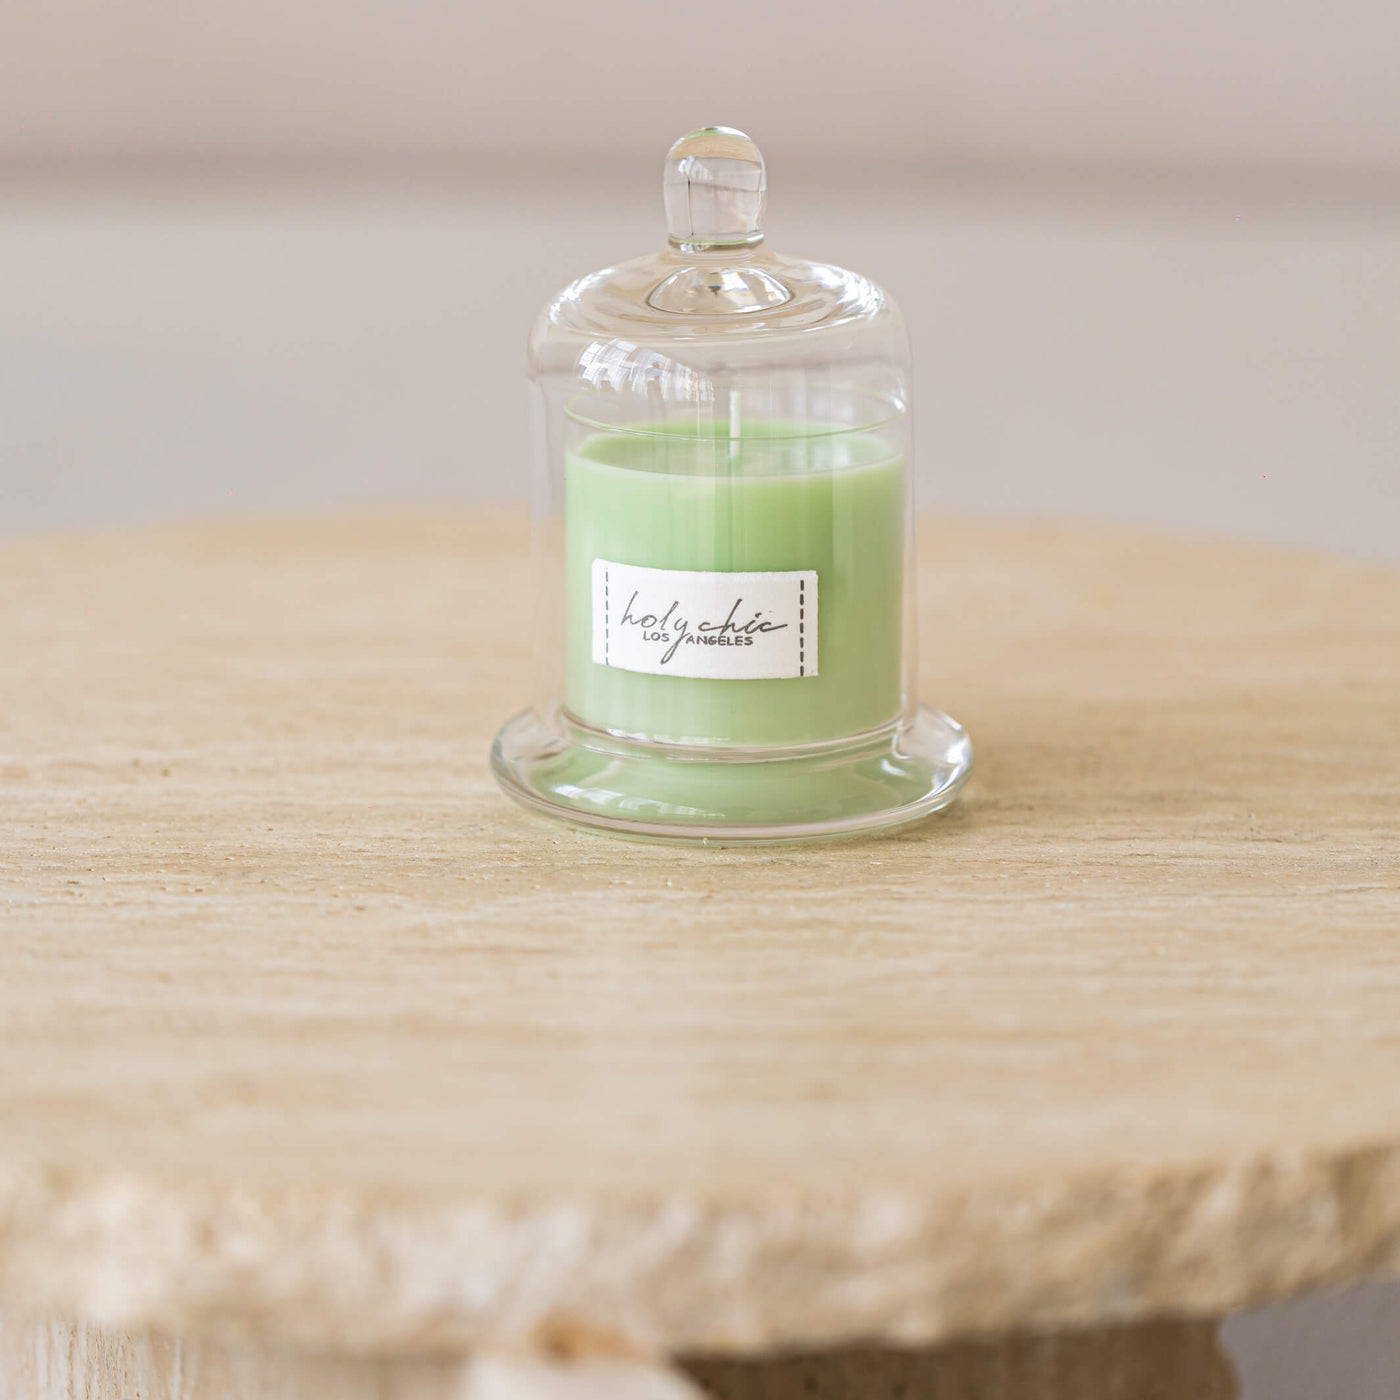 Pale greeen mint scented candle in a glass cup with a cloche in smal size